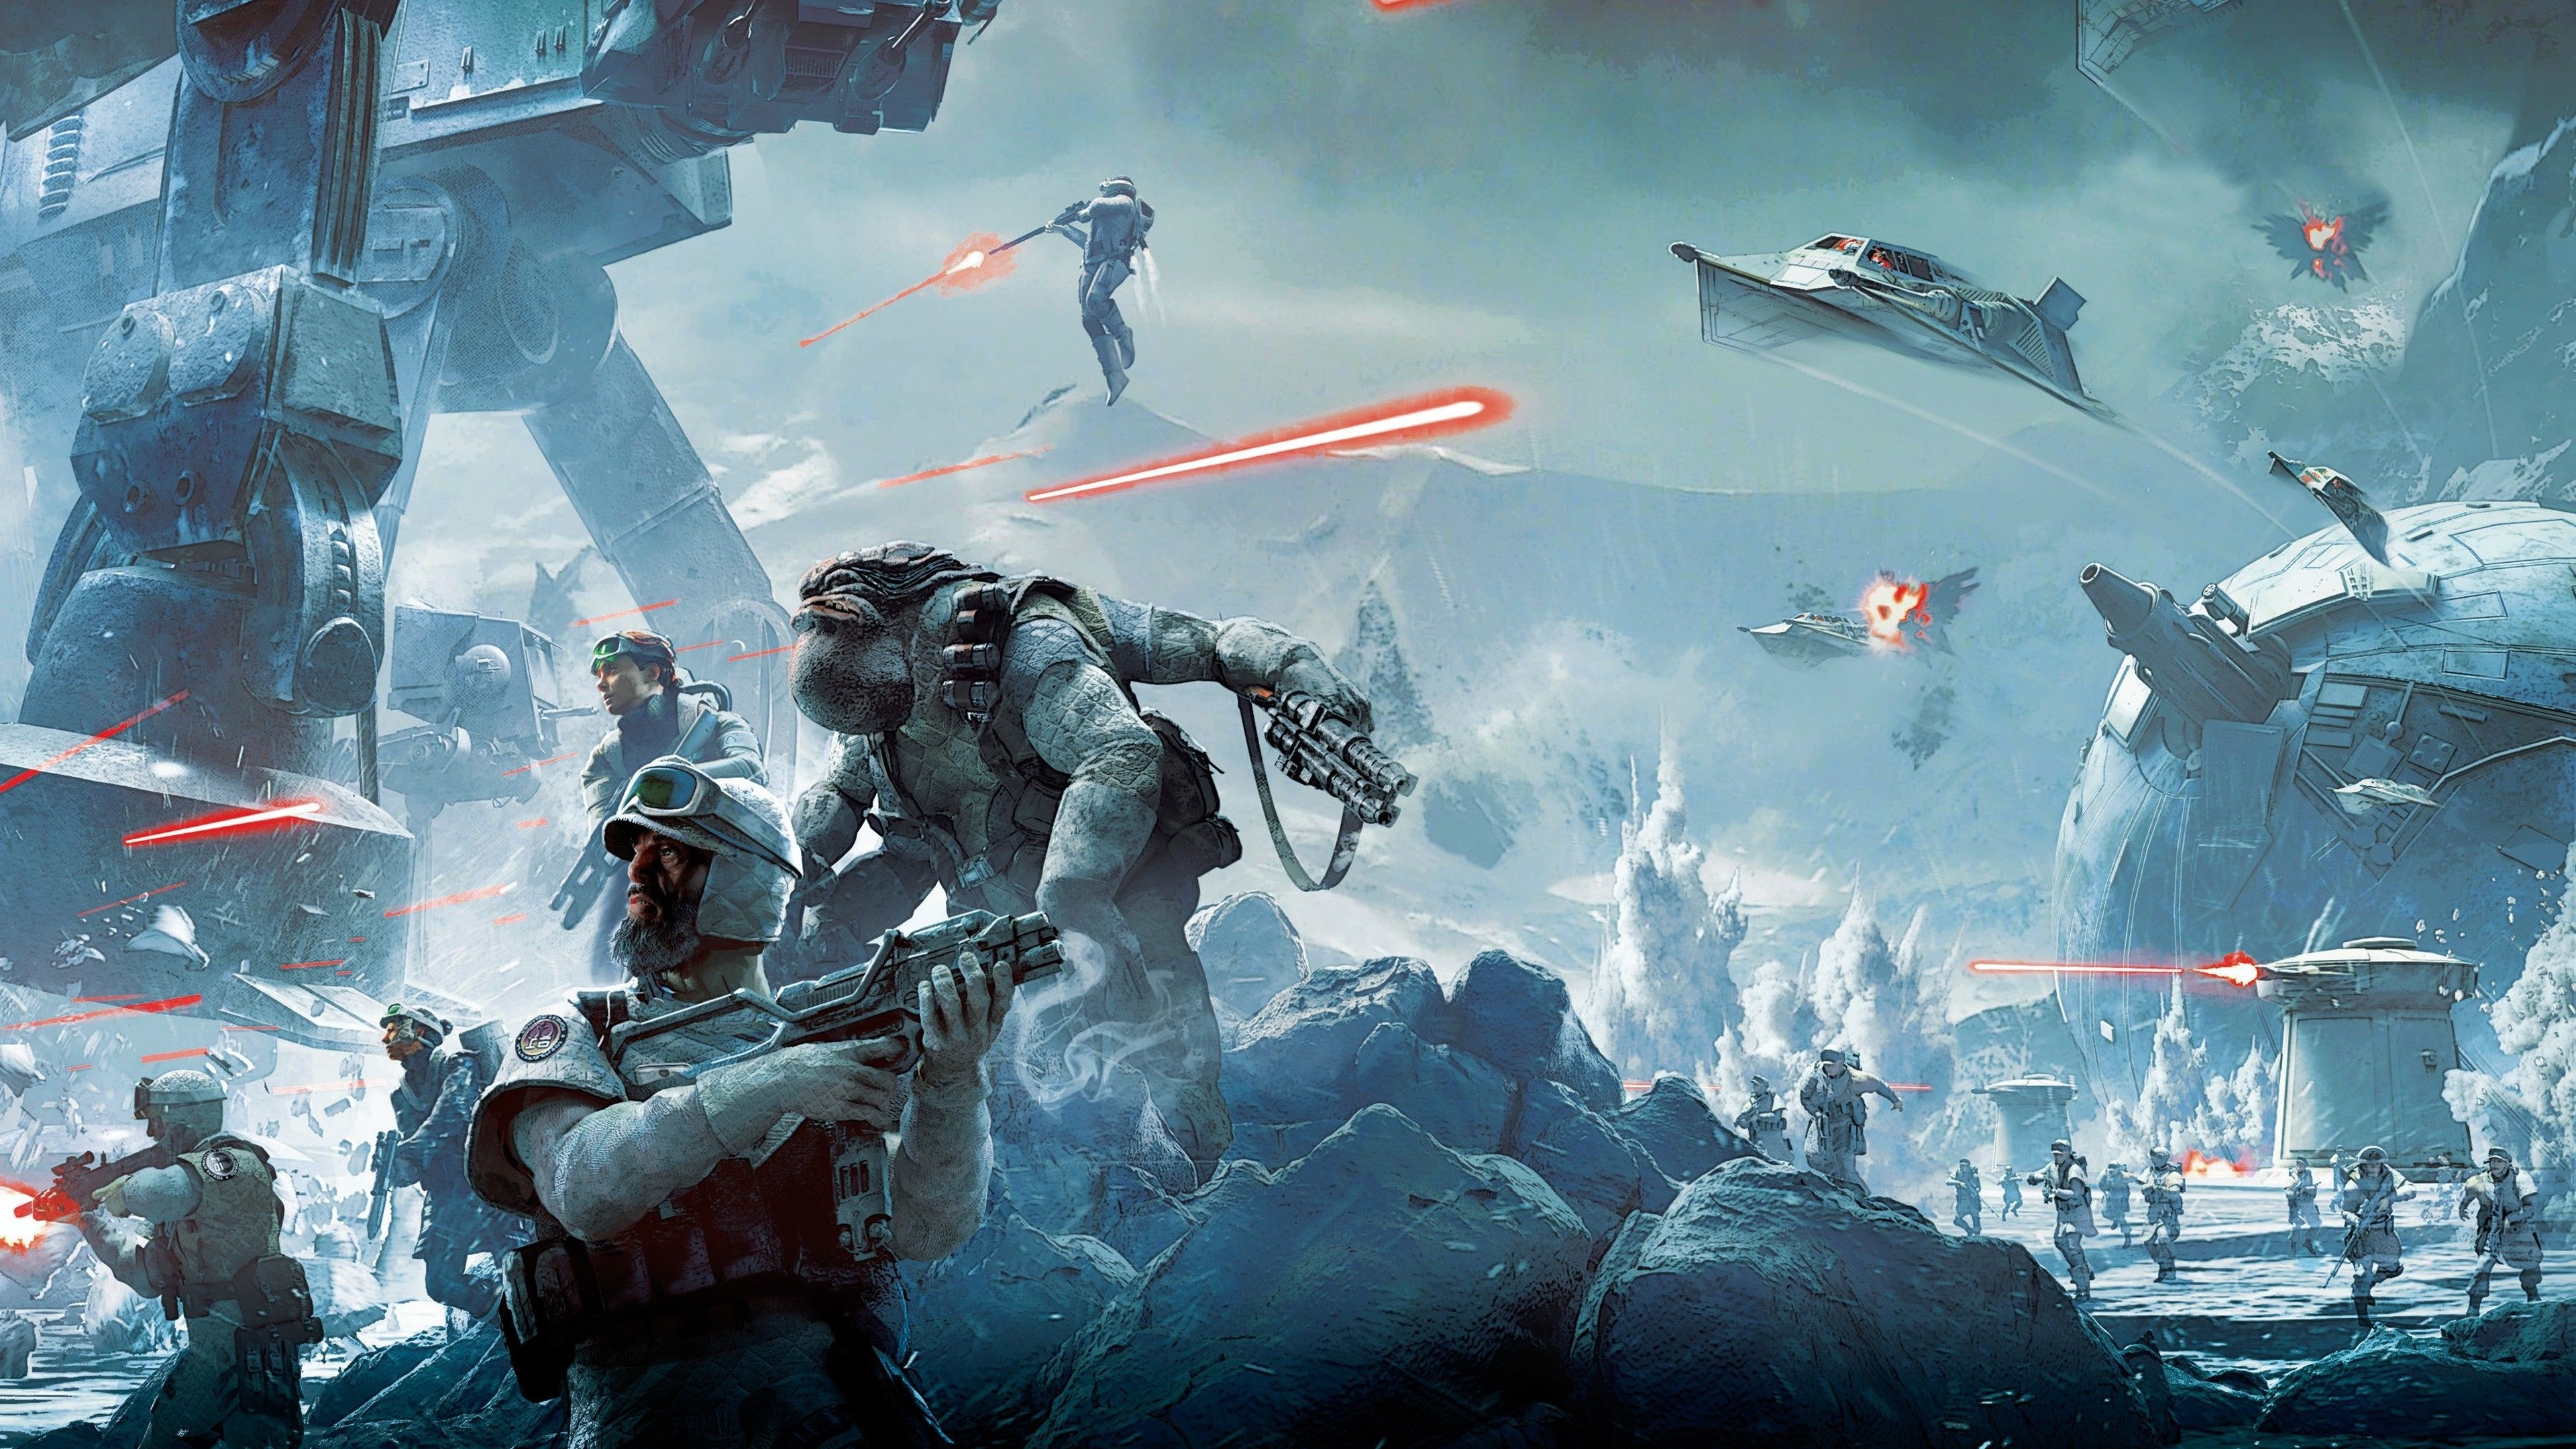 3840x2160 Star Wars Starship Combat Game | Category : Game Wallpapers Â» Star Wars:  Battlefront, Star Wars, Video .